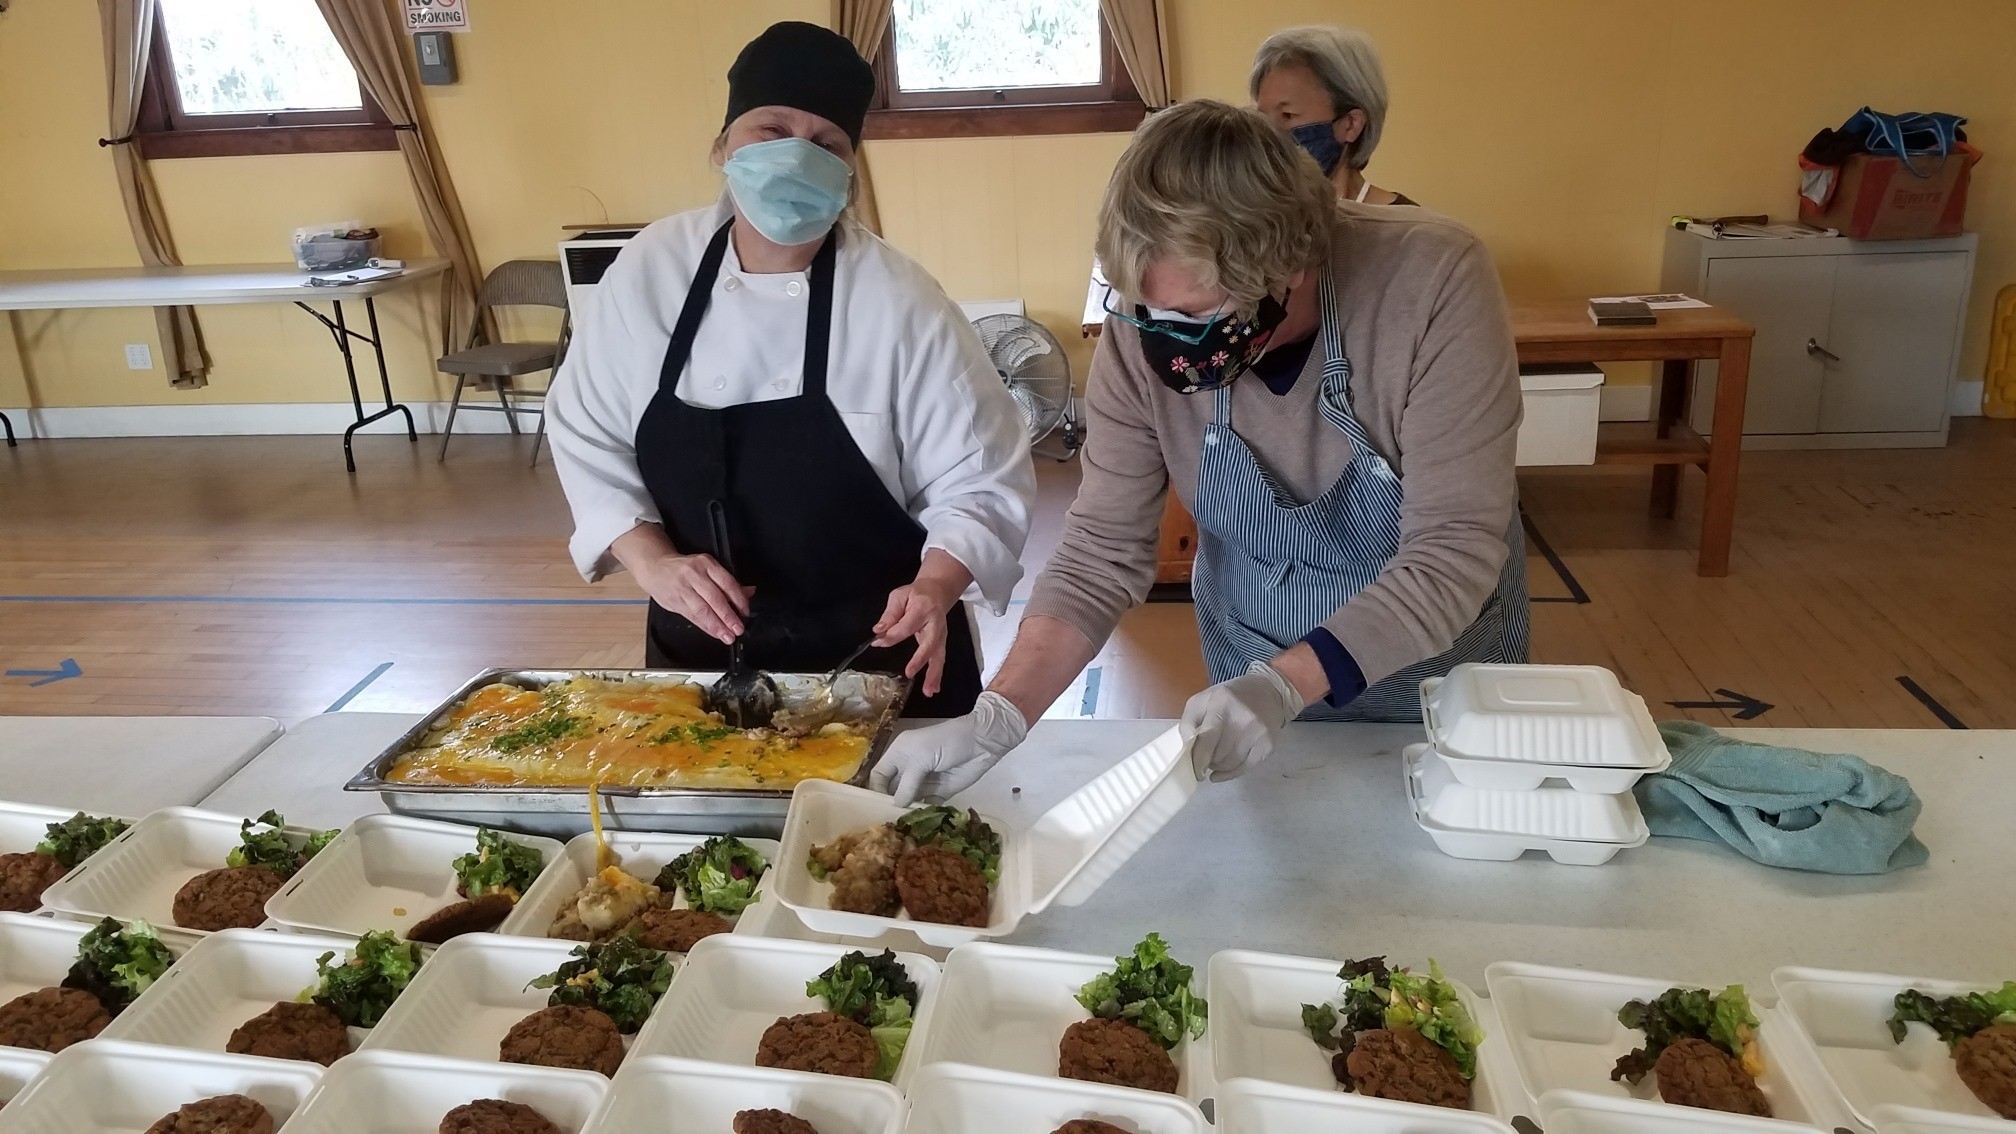 Sonoma Overnight Support serving food at the Springs Hall.